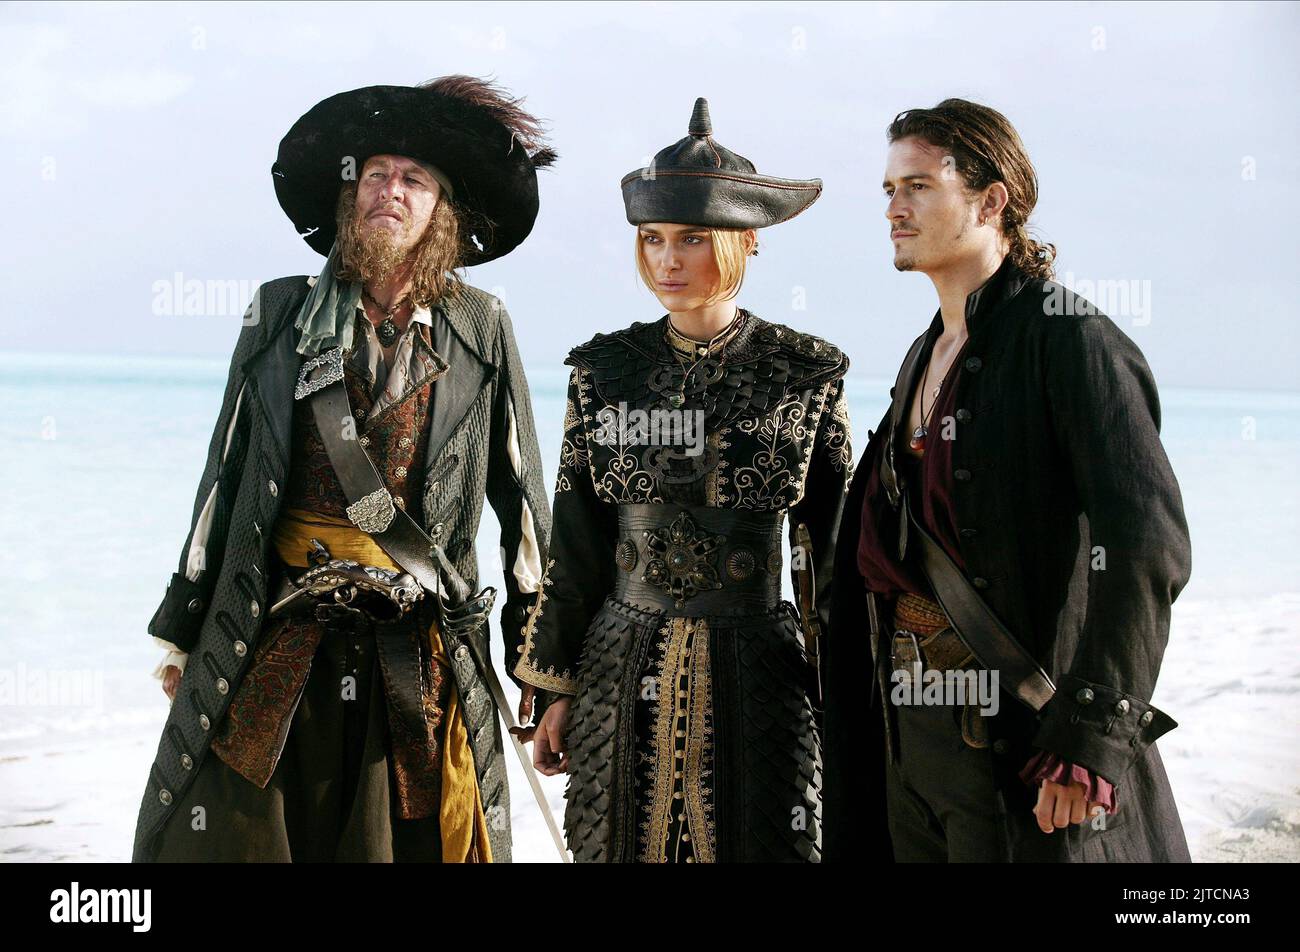 GEOFFREY RUSH, KEIRA KNIGHTLEY, ORLANDO BLOOM, PIRATES OF THE CARIBBEAN: AT WORLD'S END, 2007 Stock Photo